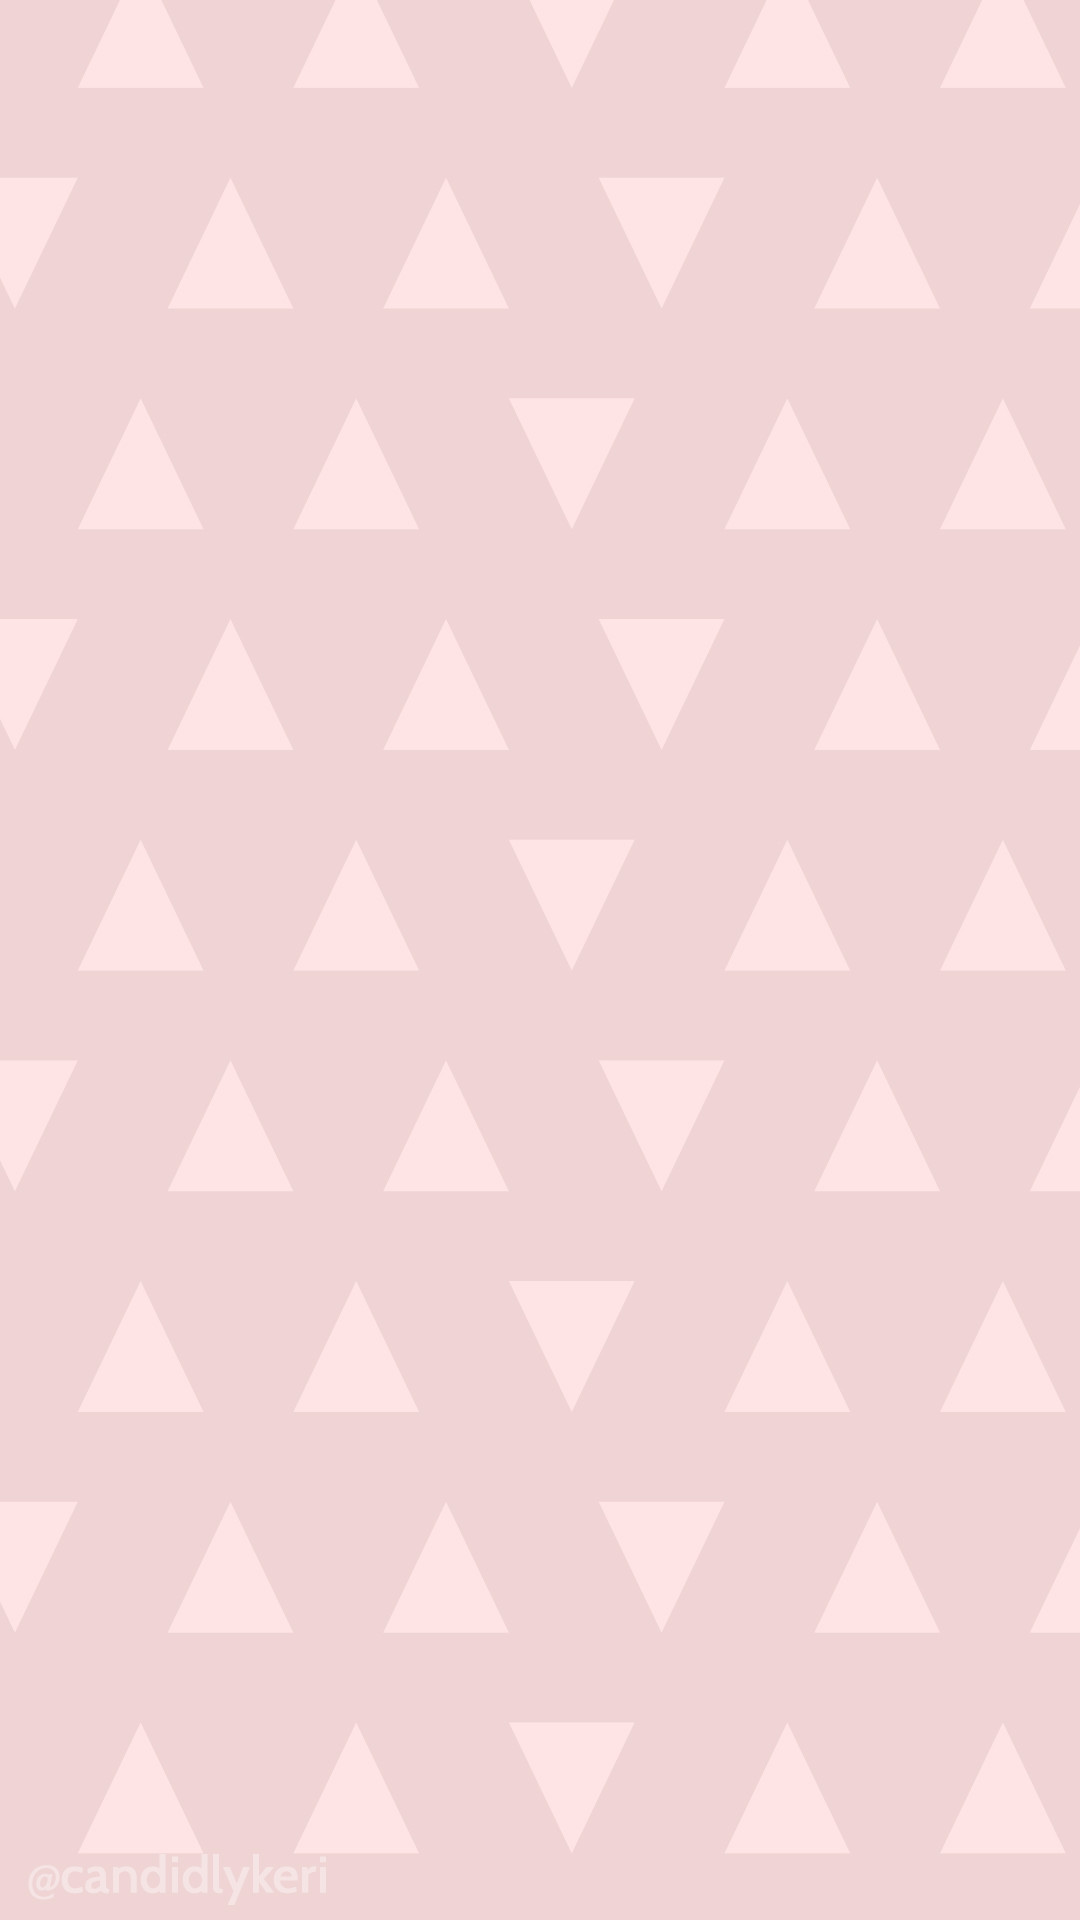 Pink pretty triangle background wallpaper you can download for free on the blog For any